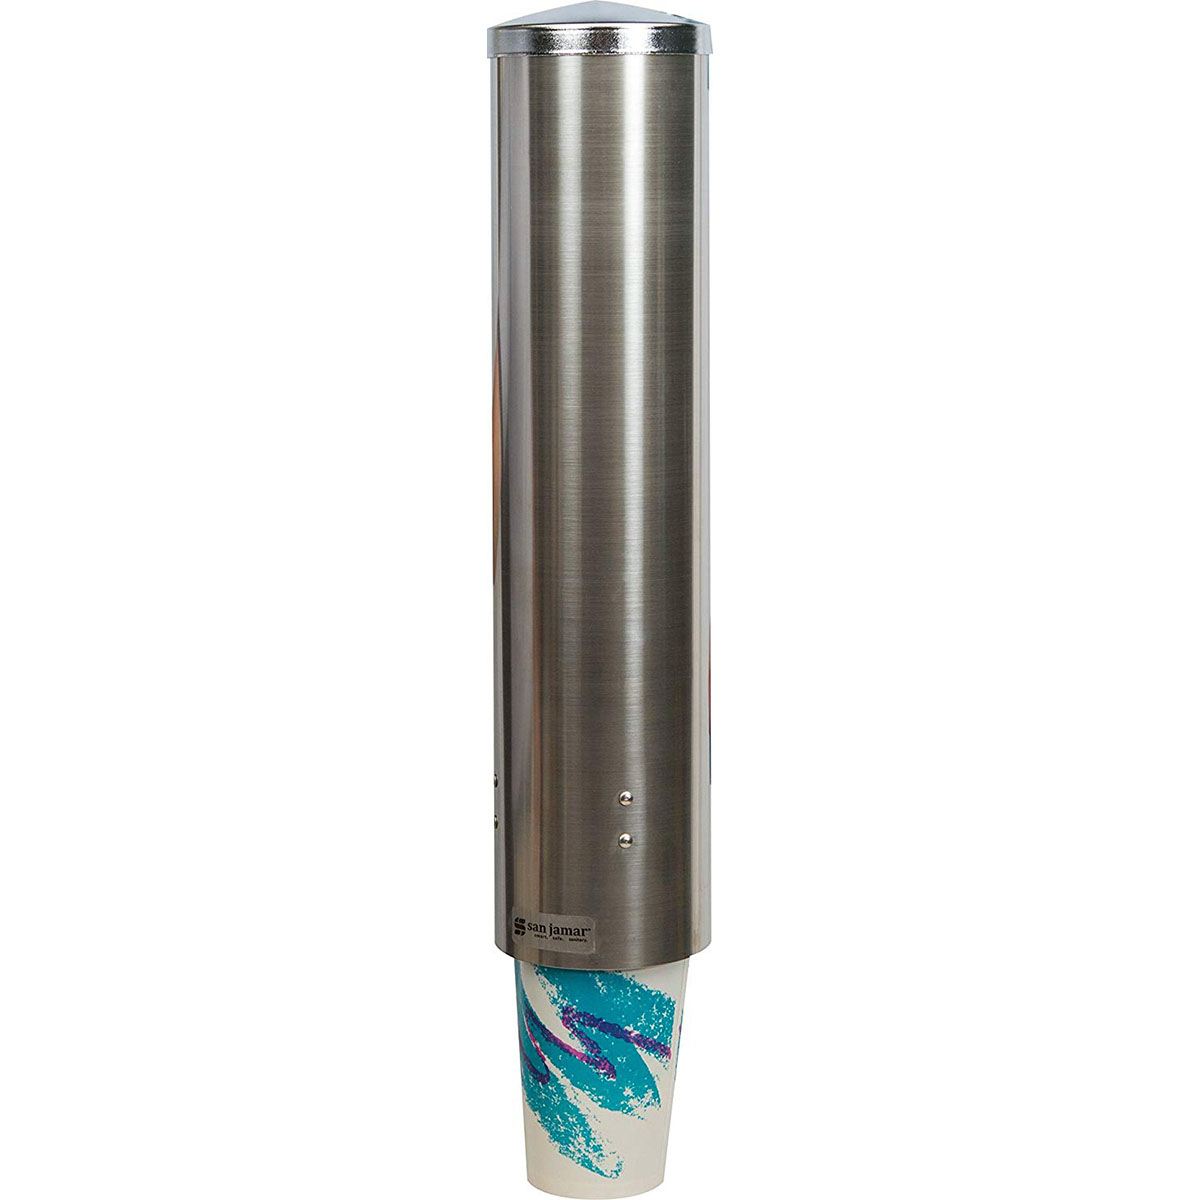 San Jamar C3250SS Stainless Steel Large Pull Type Water Cup Dispenser image 2